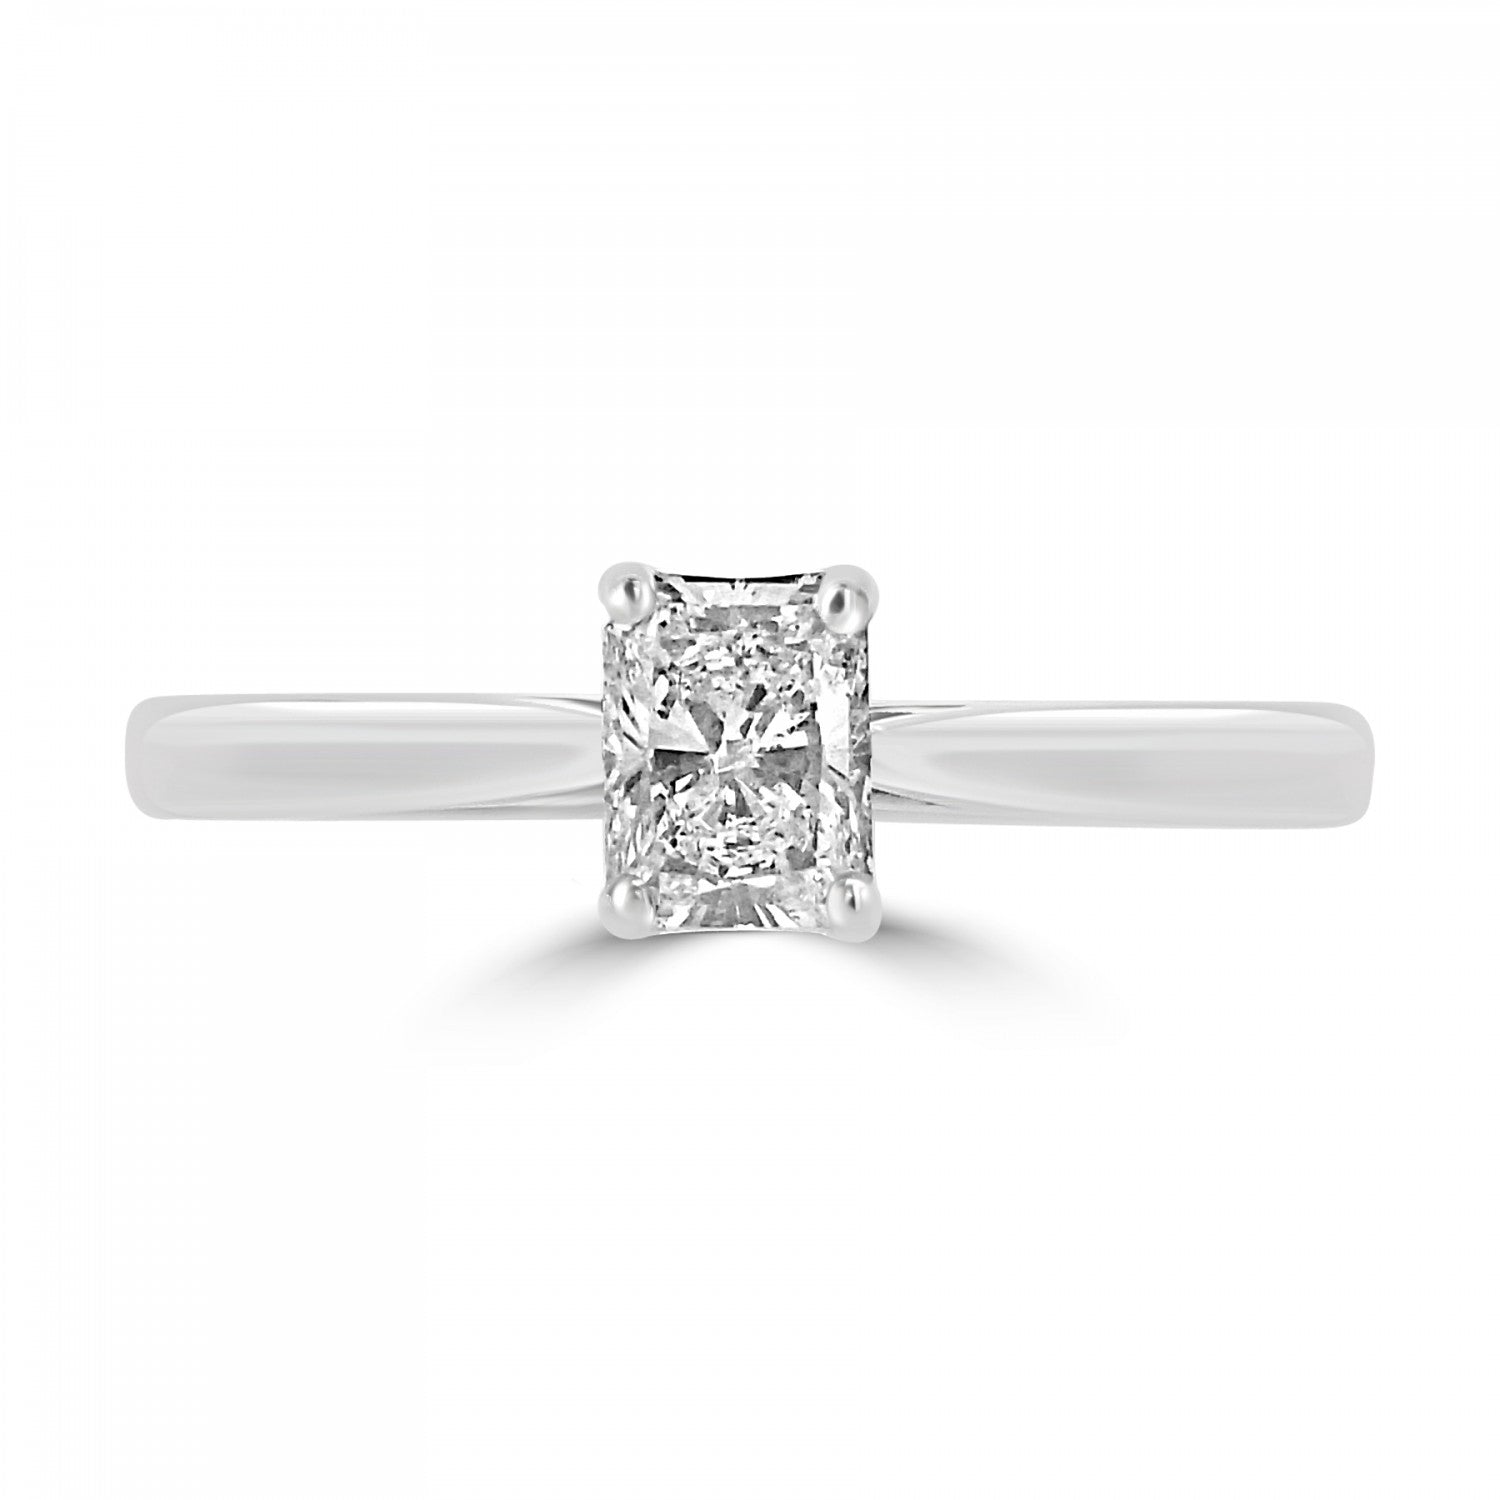 RADIANT CUT DIAMOND SOLITAIRE ENGAGEMENT RING